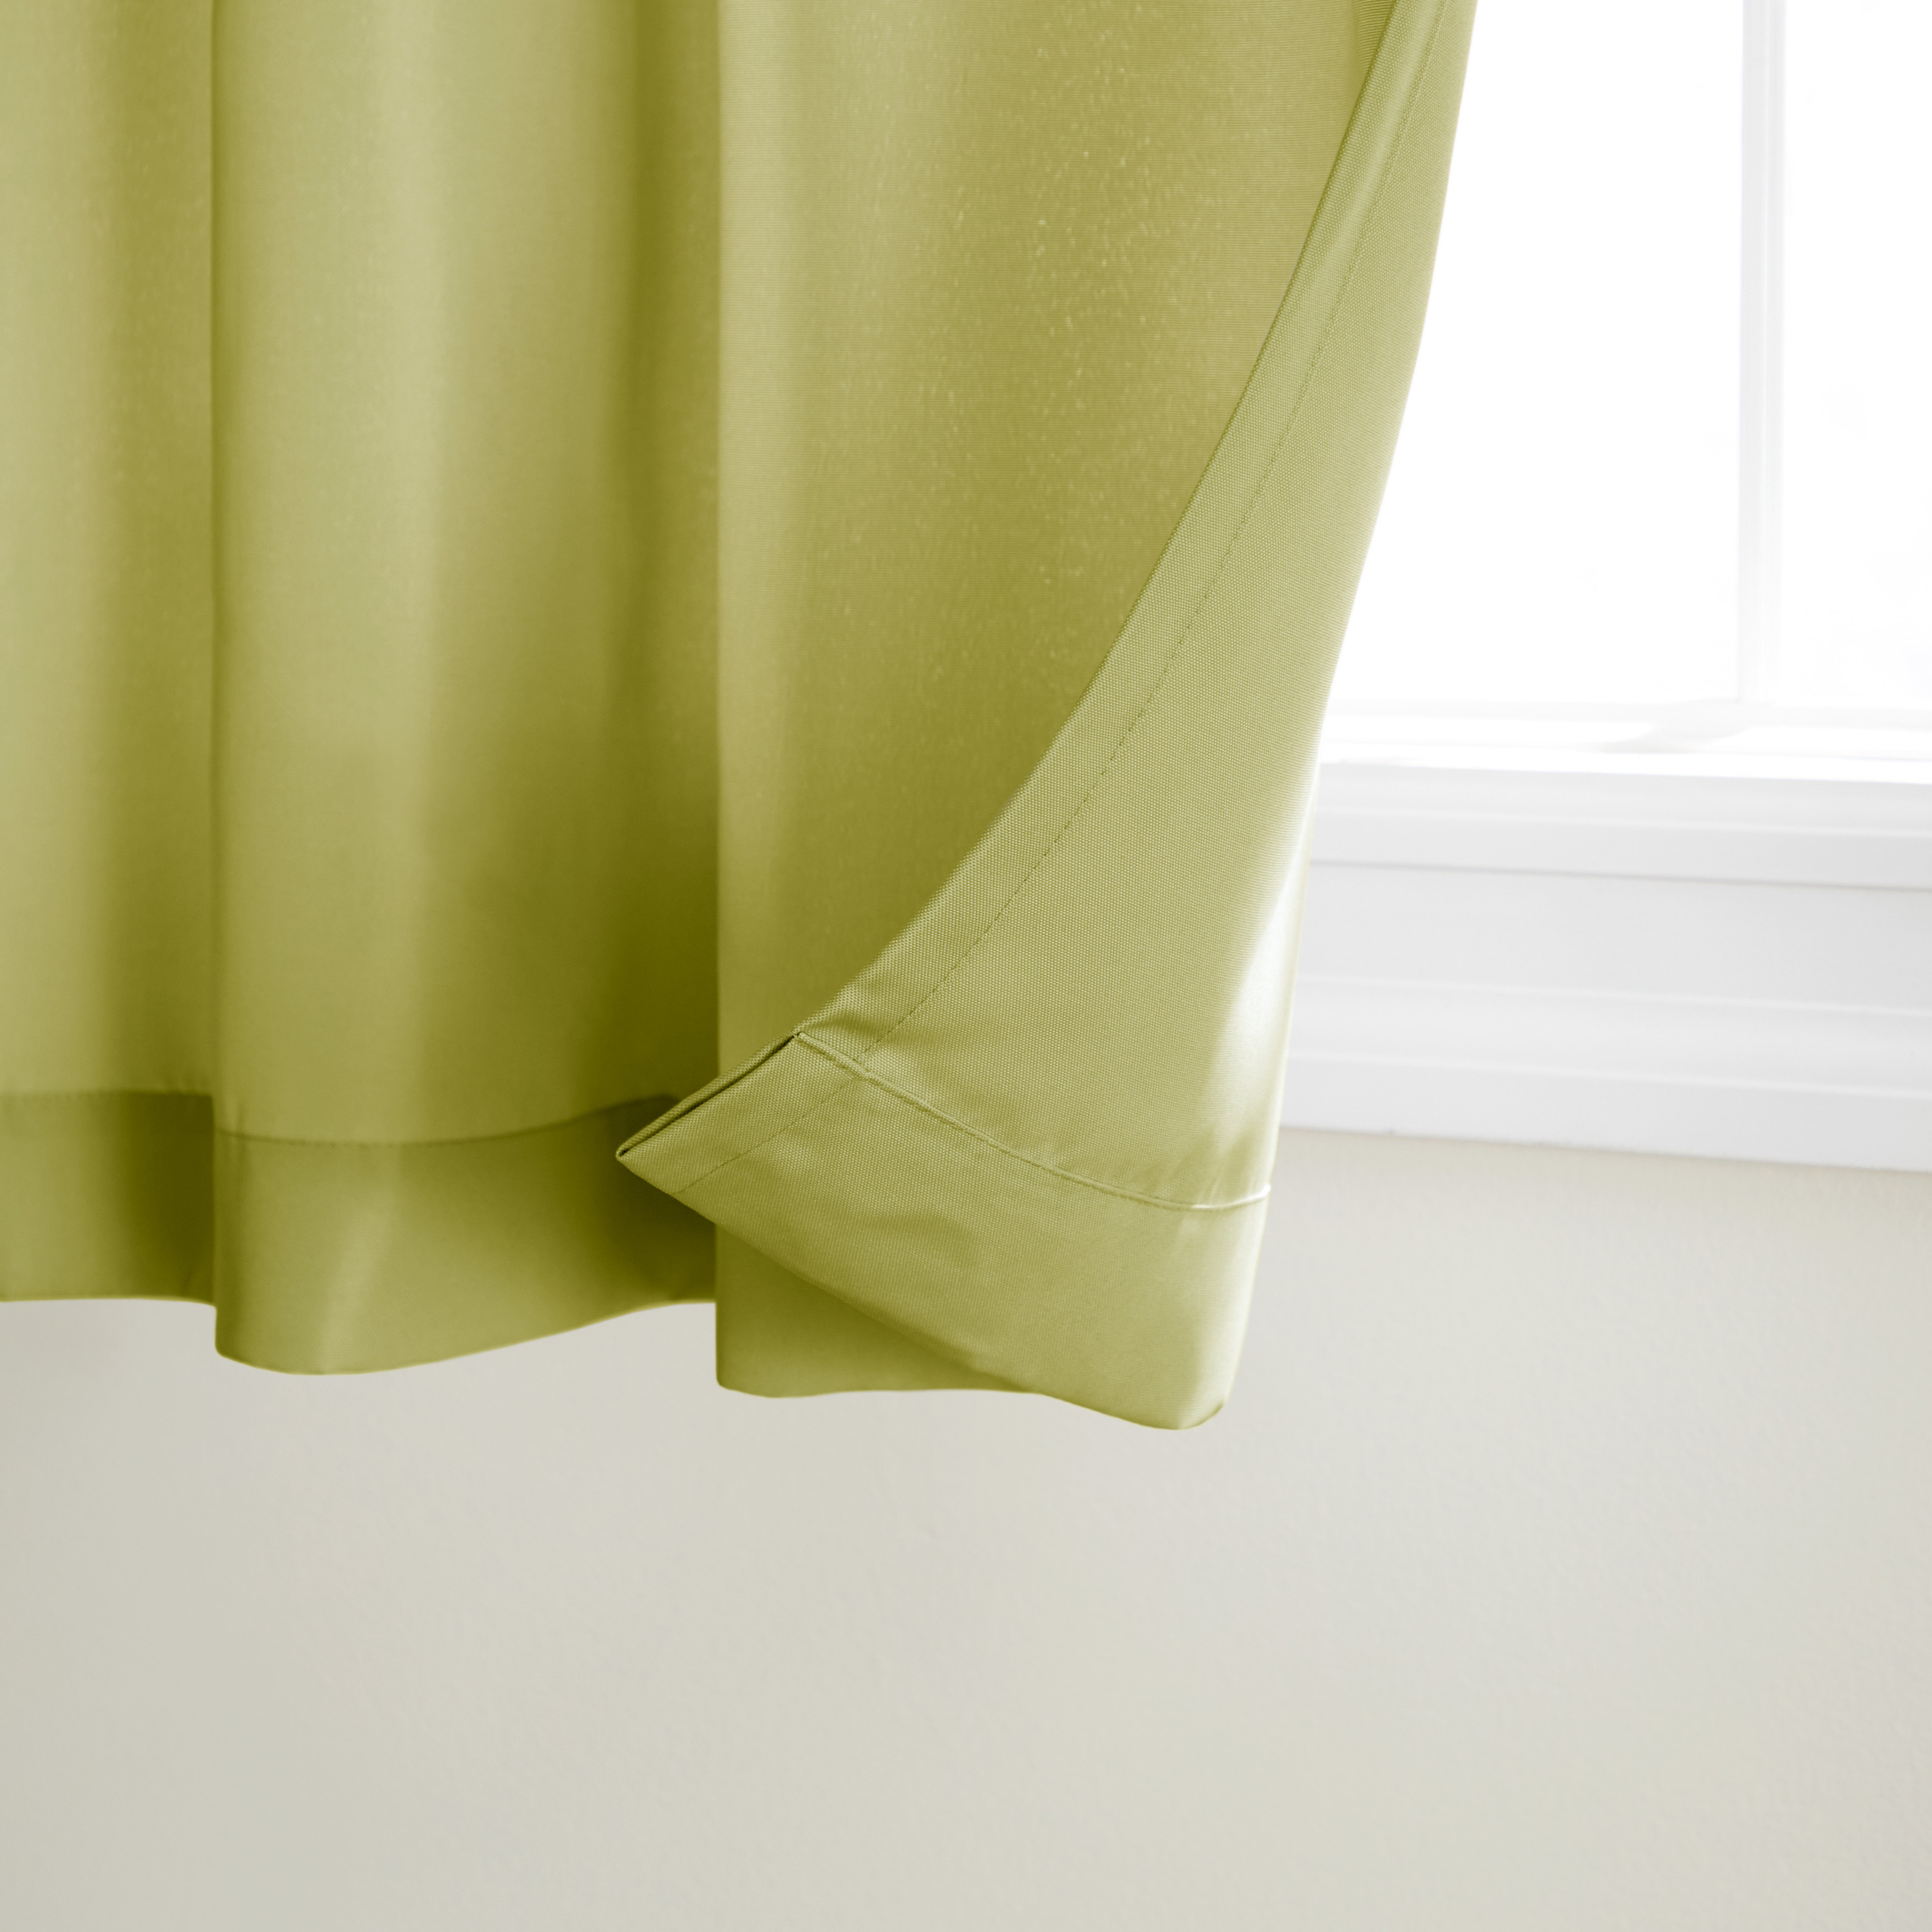 Exclusive Home Curtains Indoor/Outdoor Solid Cabana Grommet Top Curtain Panel Pair, 54x84, Kiwi Green - image 2 of 10